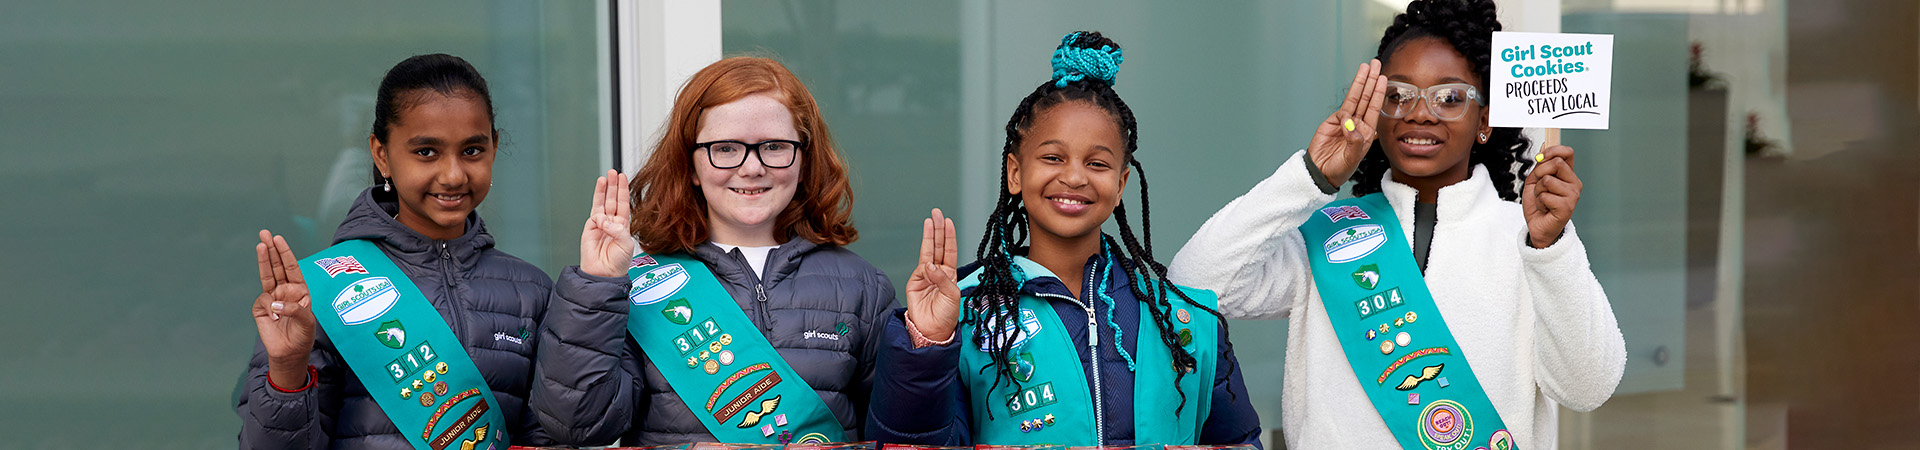  Four Girl Scout Juniors stand in front of a building holding a sign that says "Girl Scout Cookies Proceeds Stay Local" 